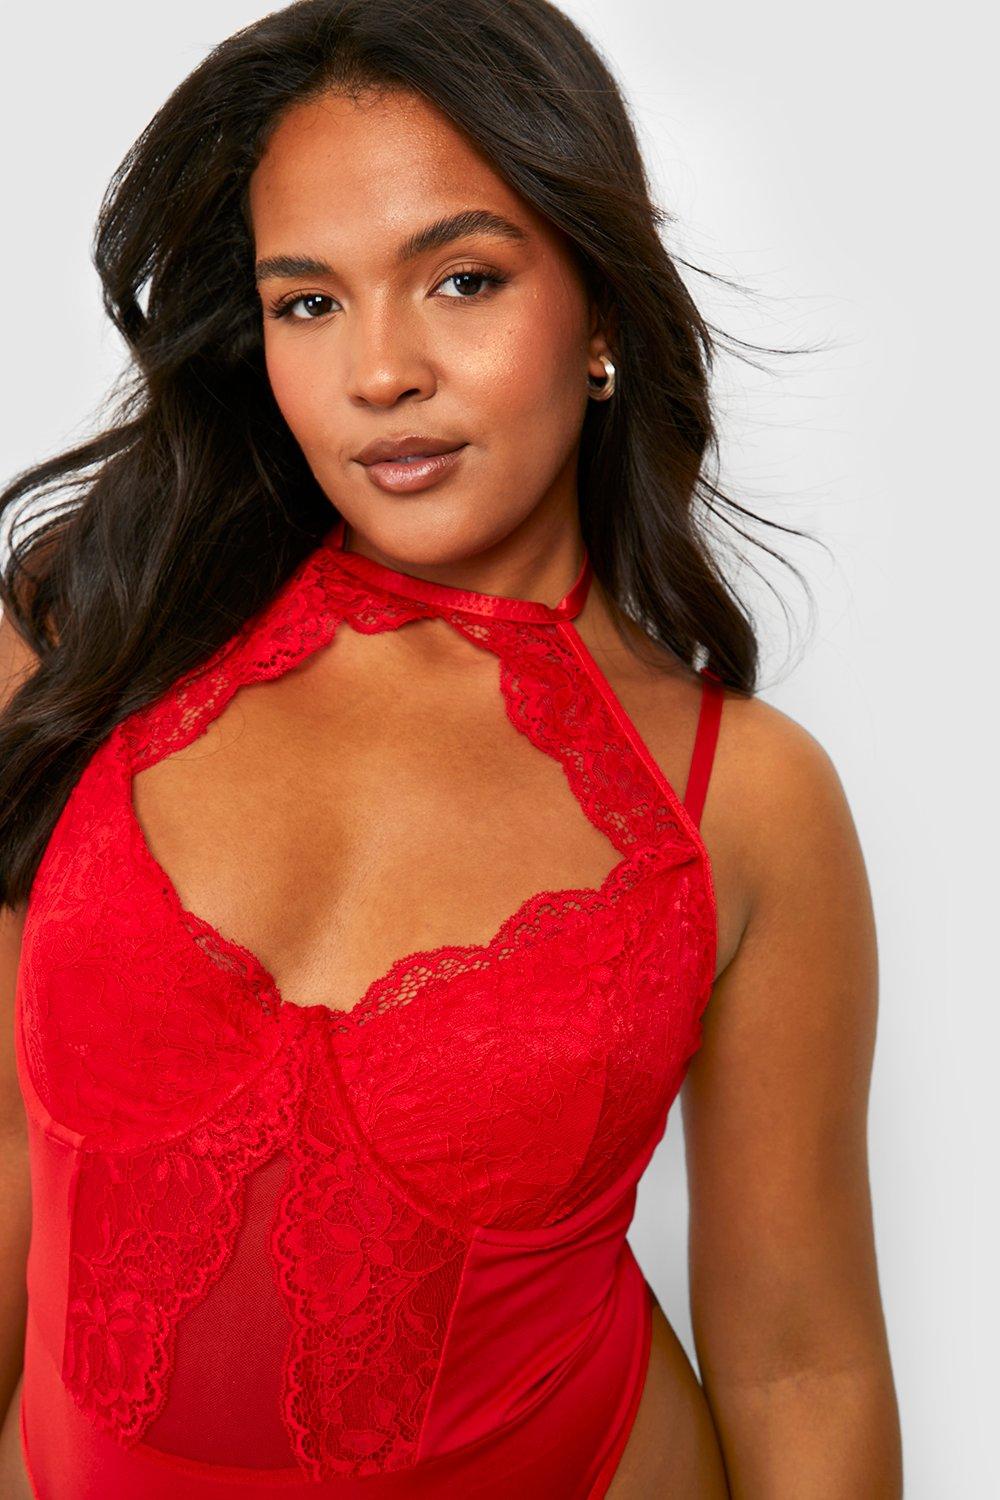 Plus Size Wine Red Glamour Underwire Sheer Lace Teddy – Plus Curvves